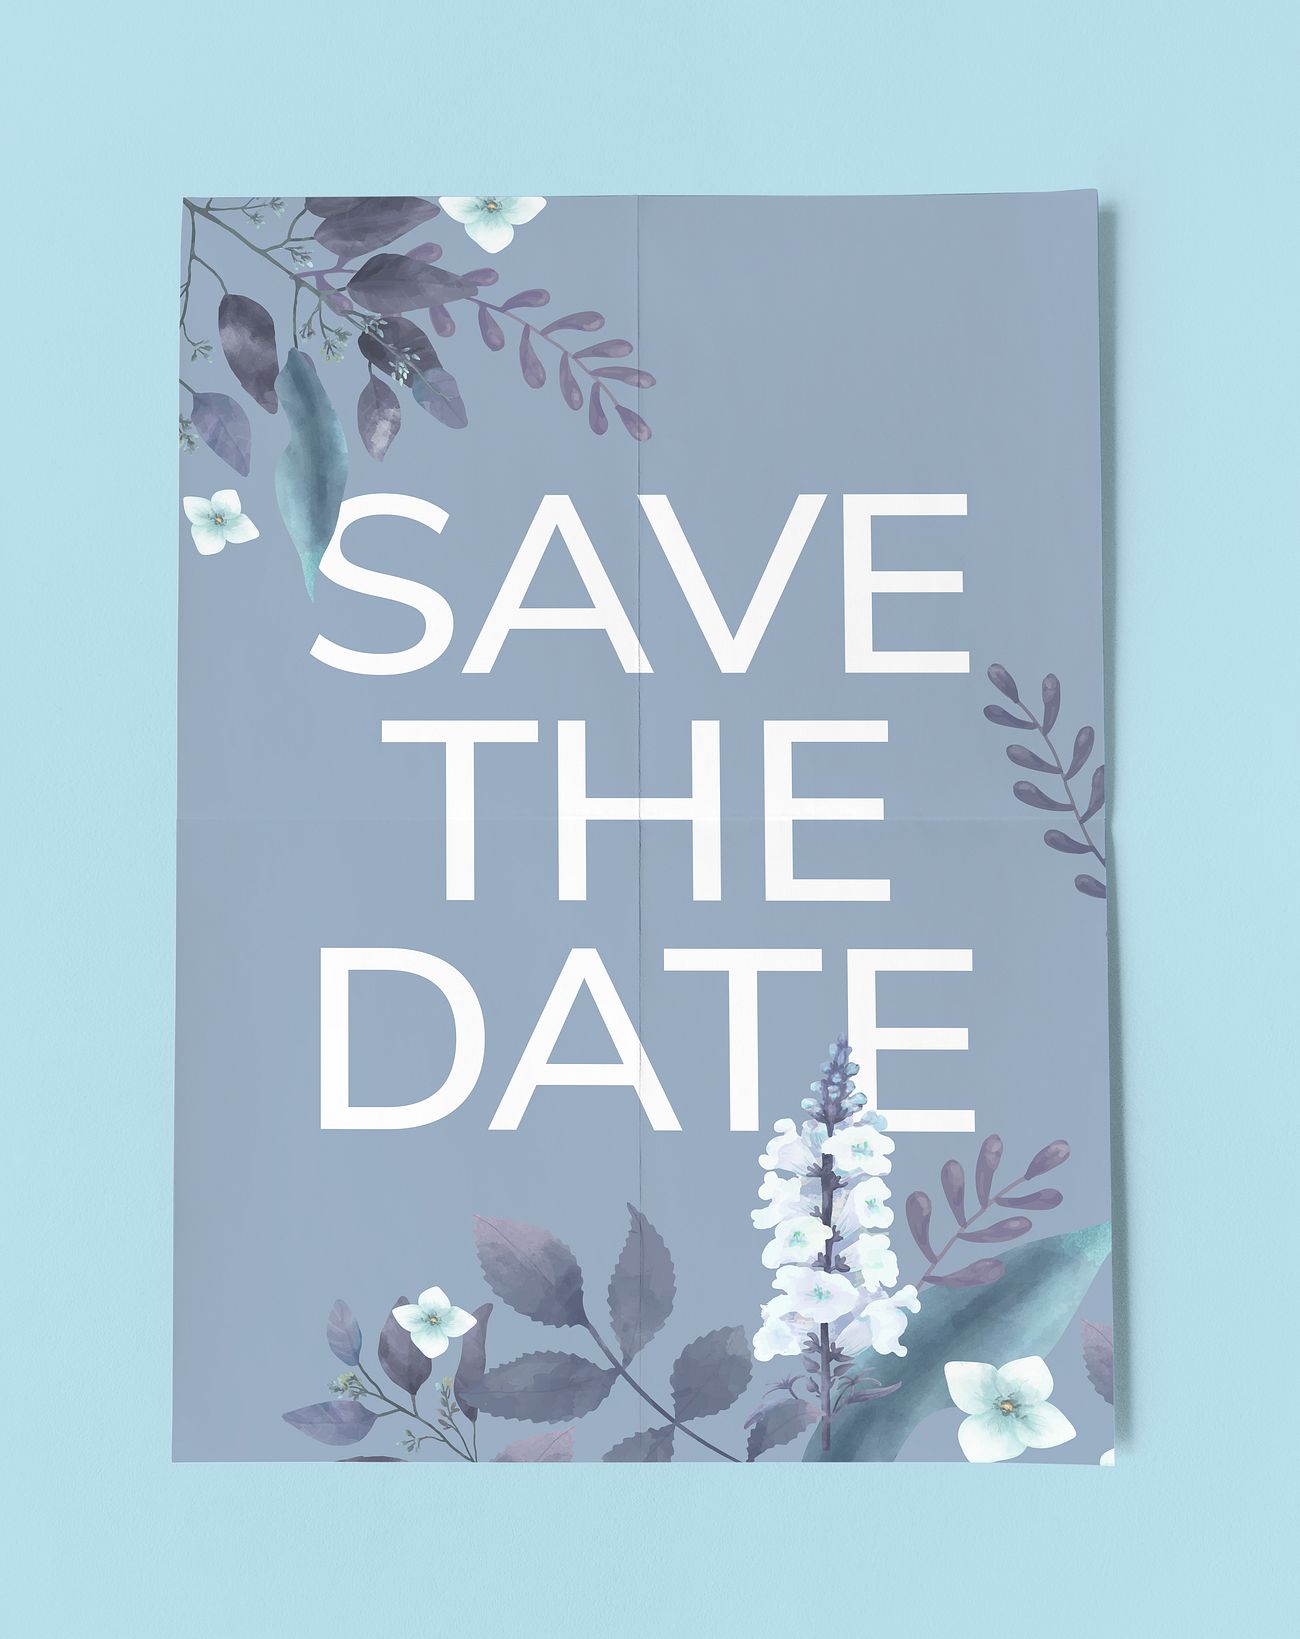 Download Save the date poster mockup | Free psd mockup - 531888